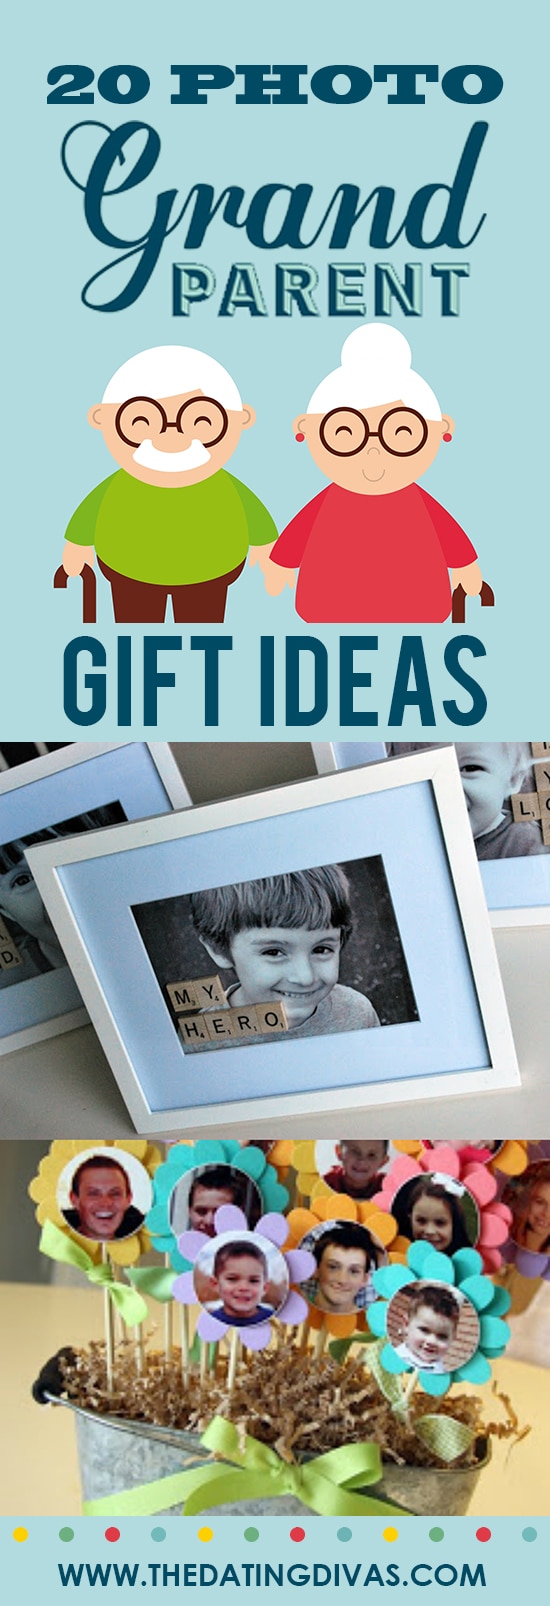 Photo gift ideas for Grandparents Day